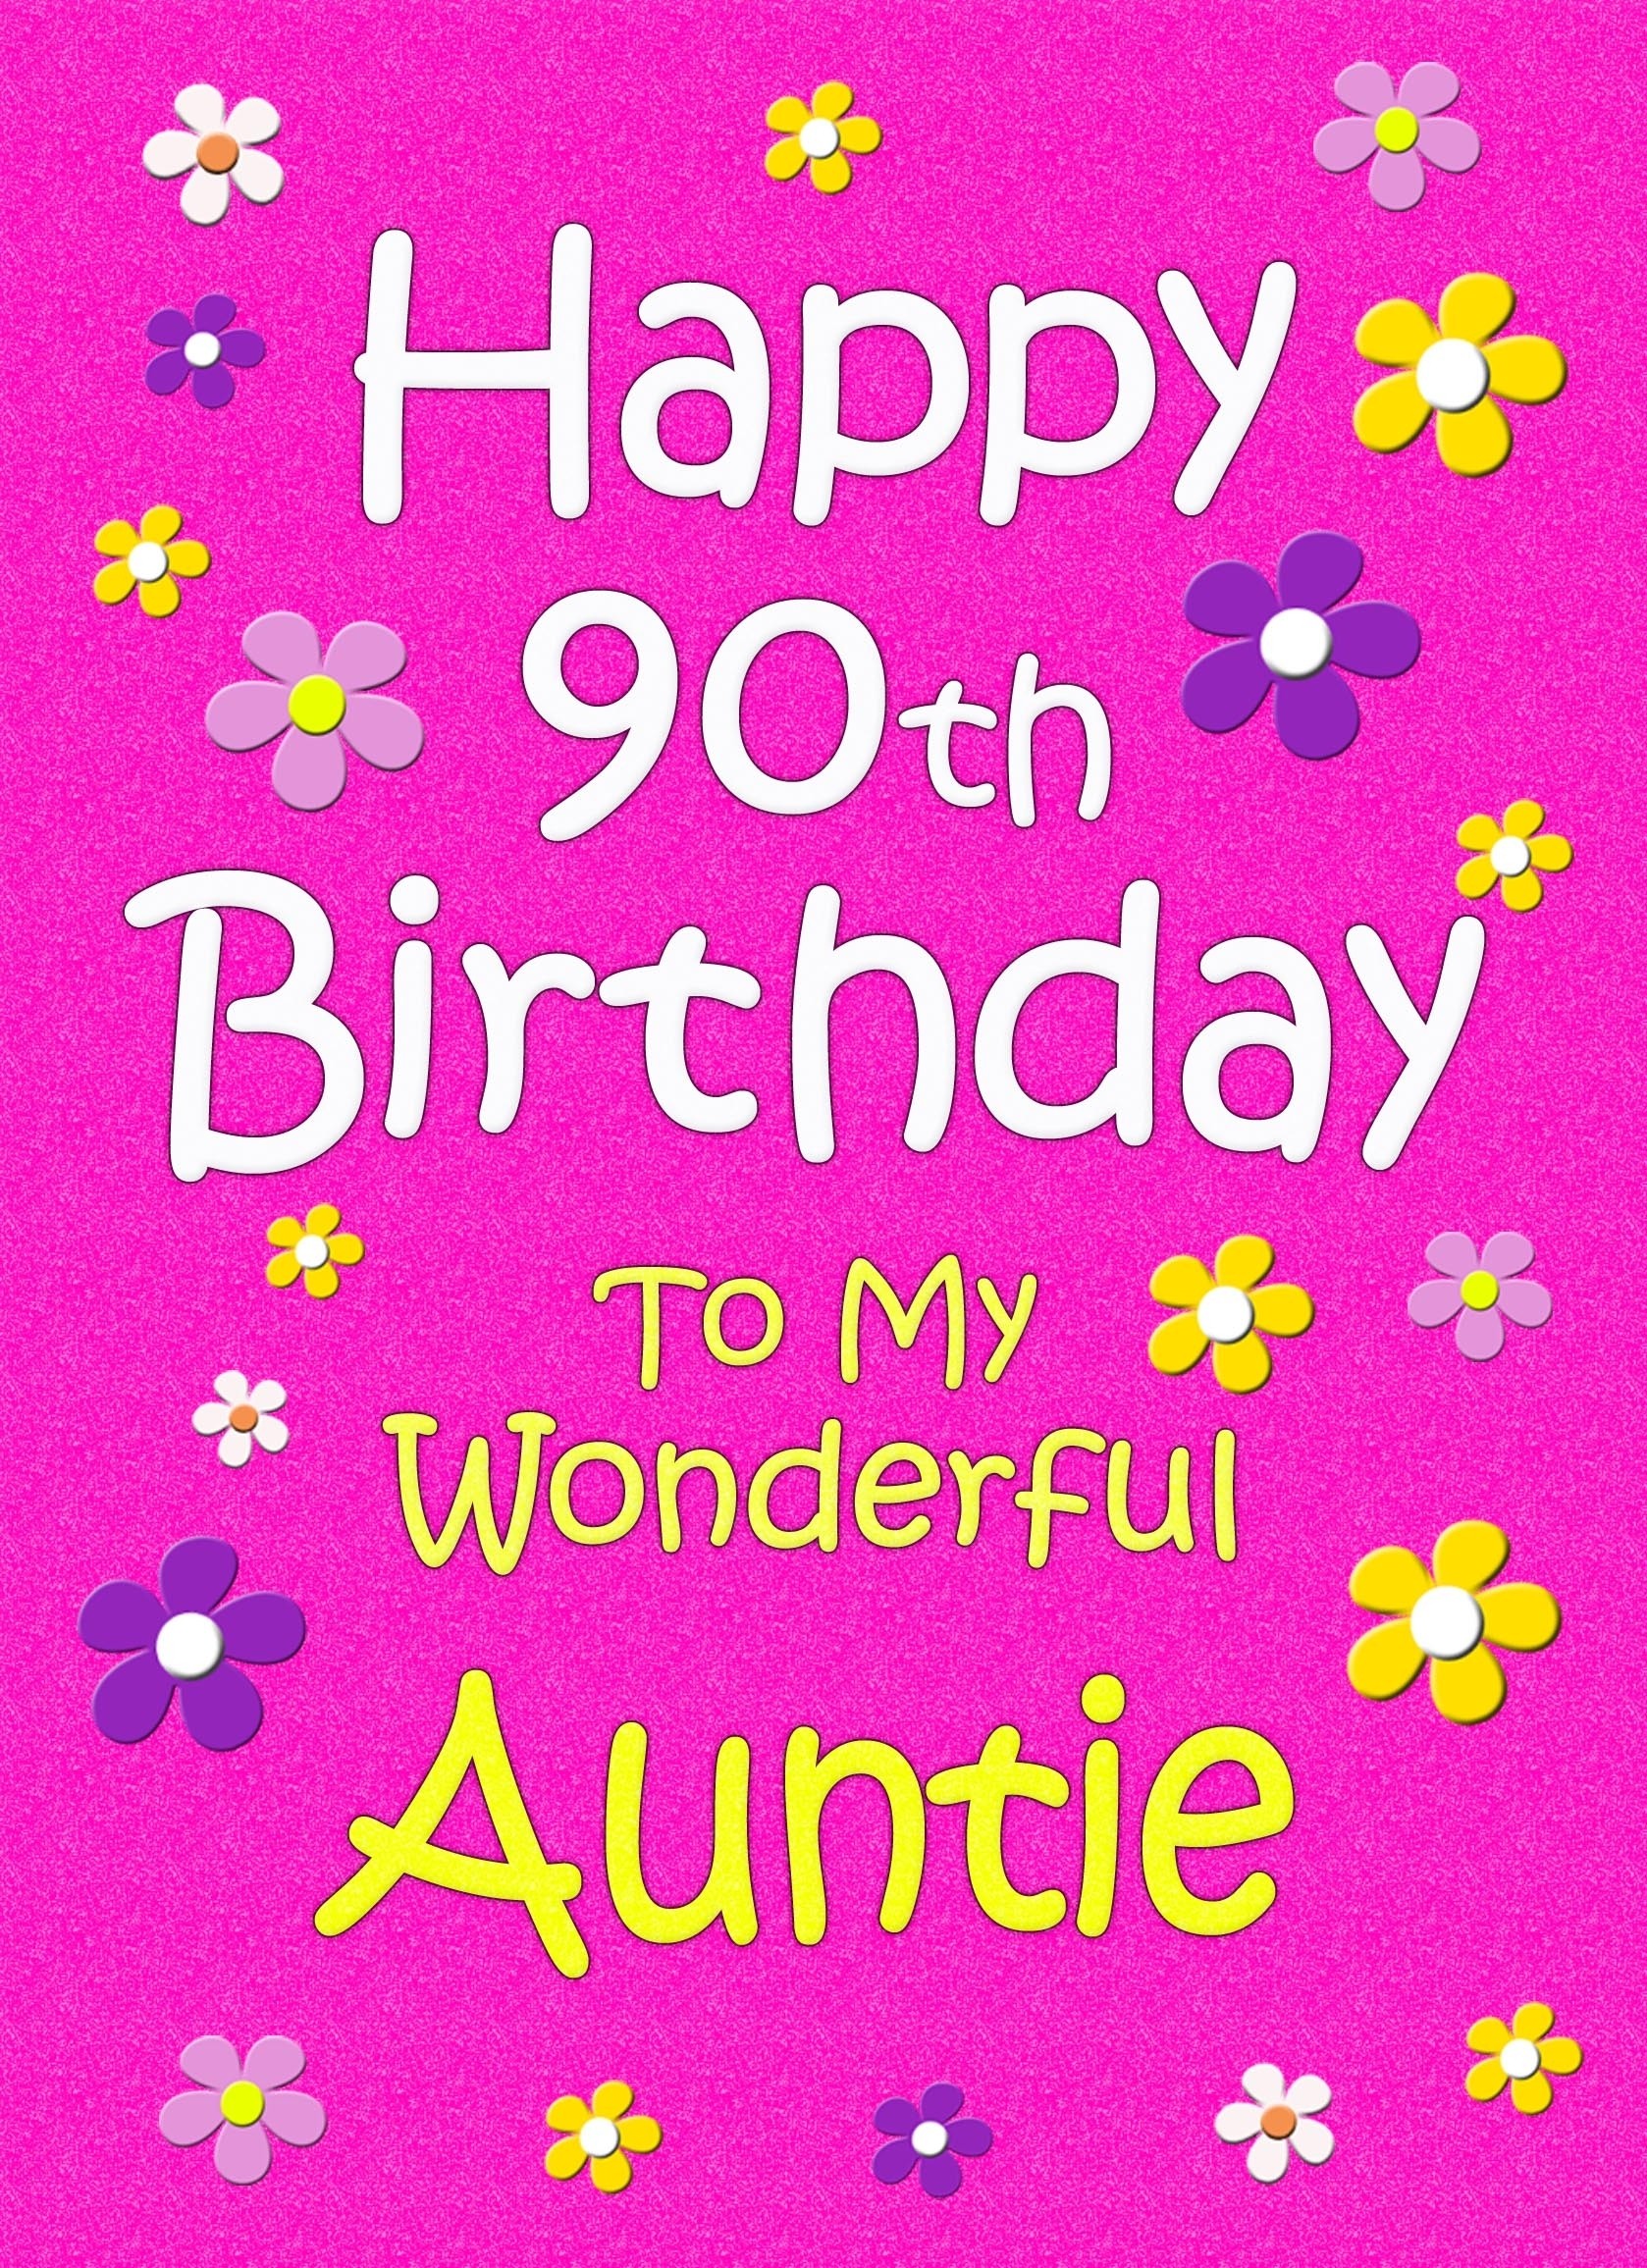 Auntie 90th Birthday Card (Pink)